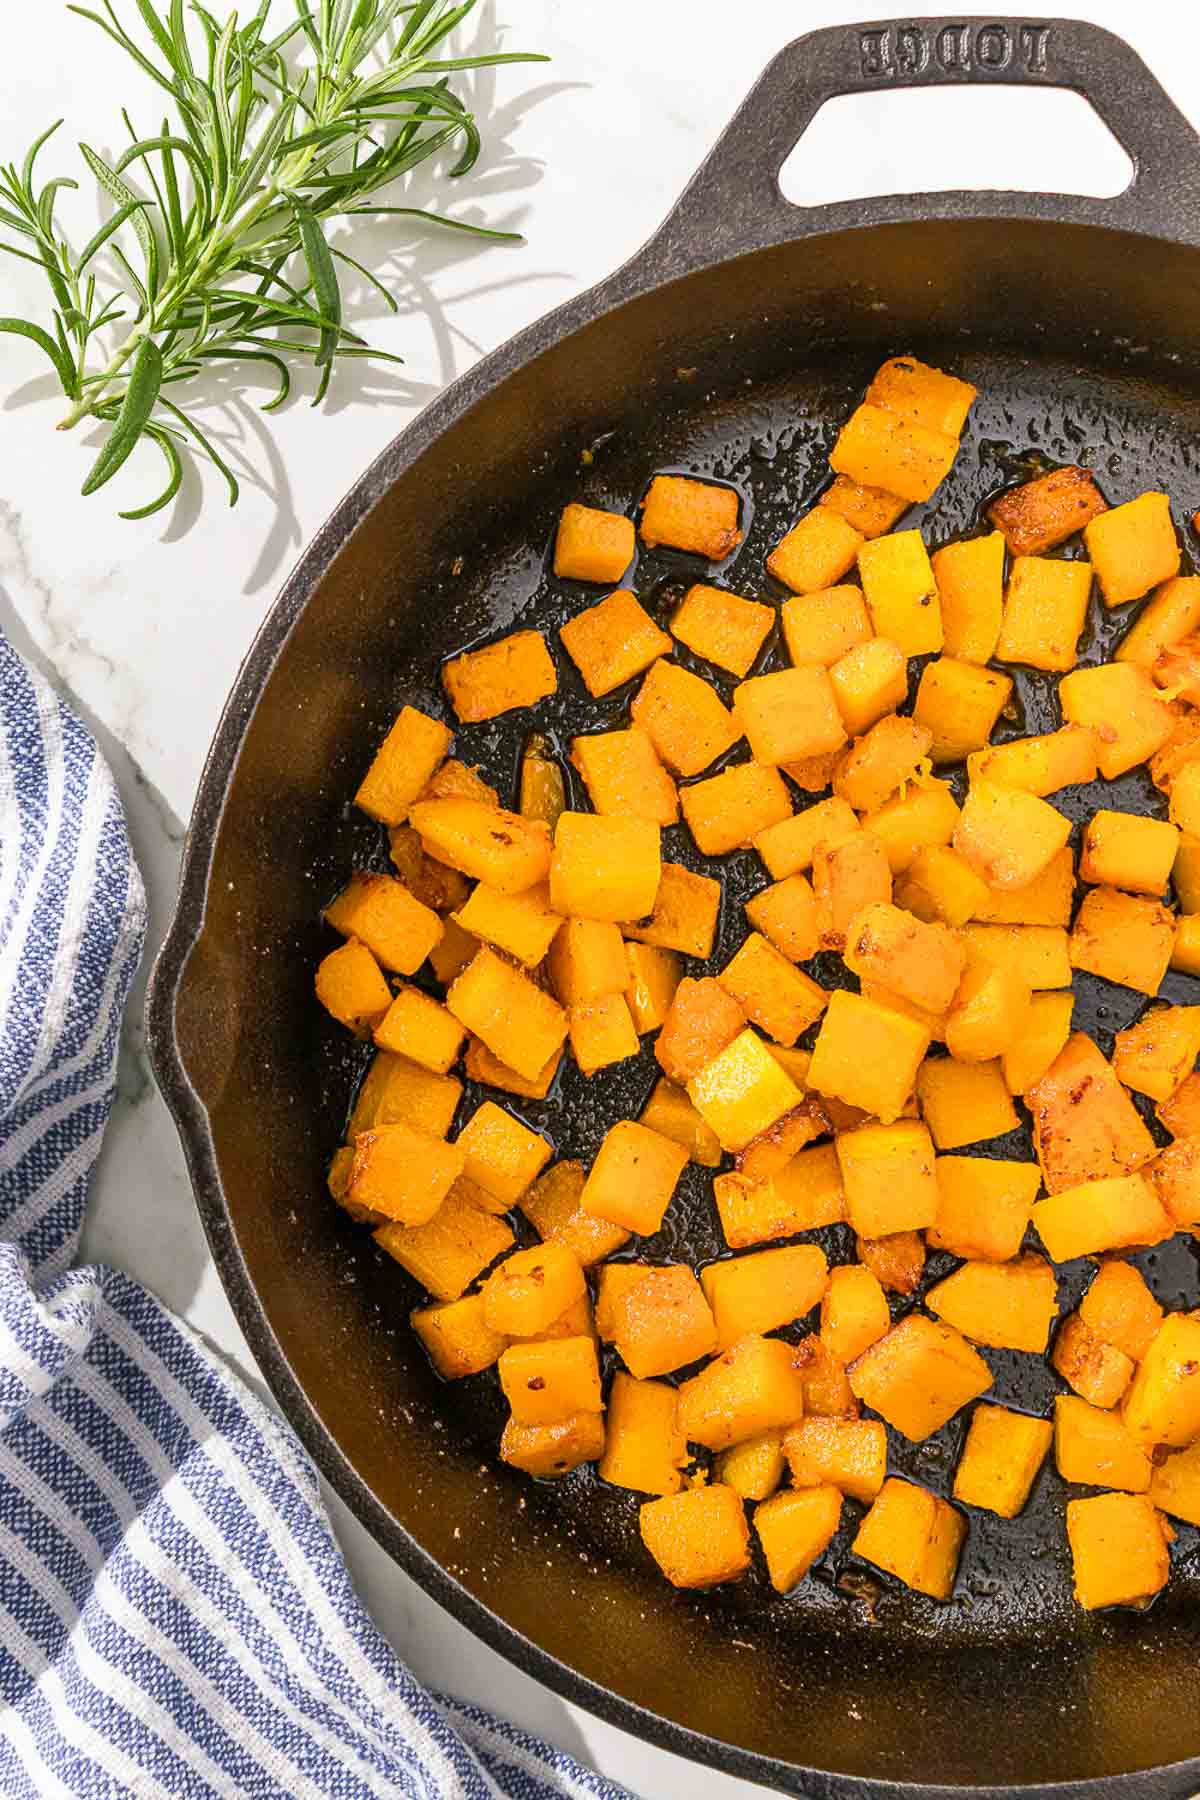 Roasted butternut squash in a cast iron skillet.